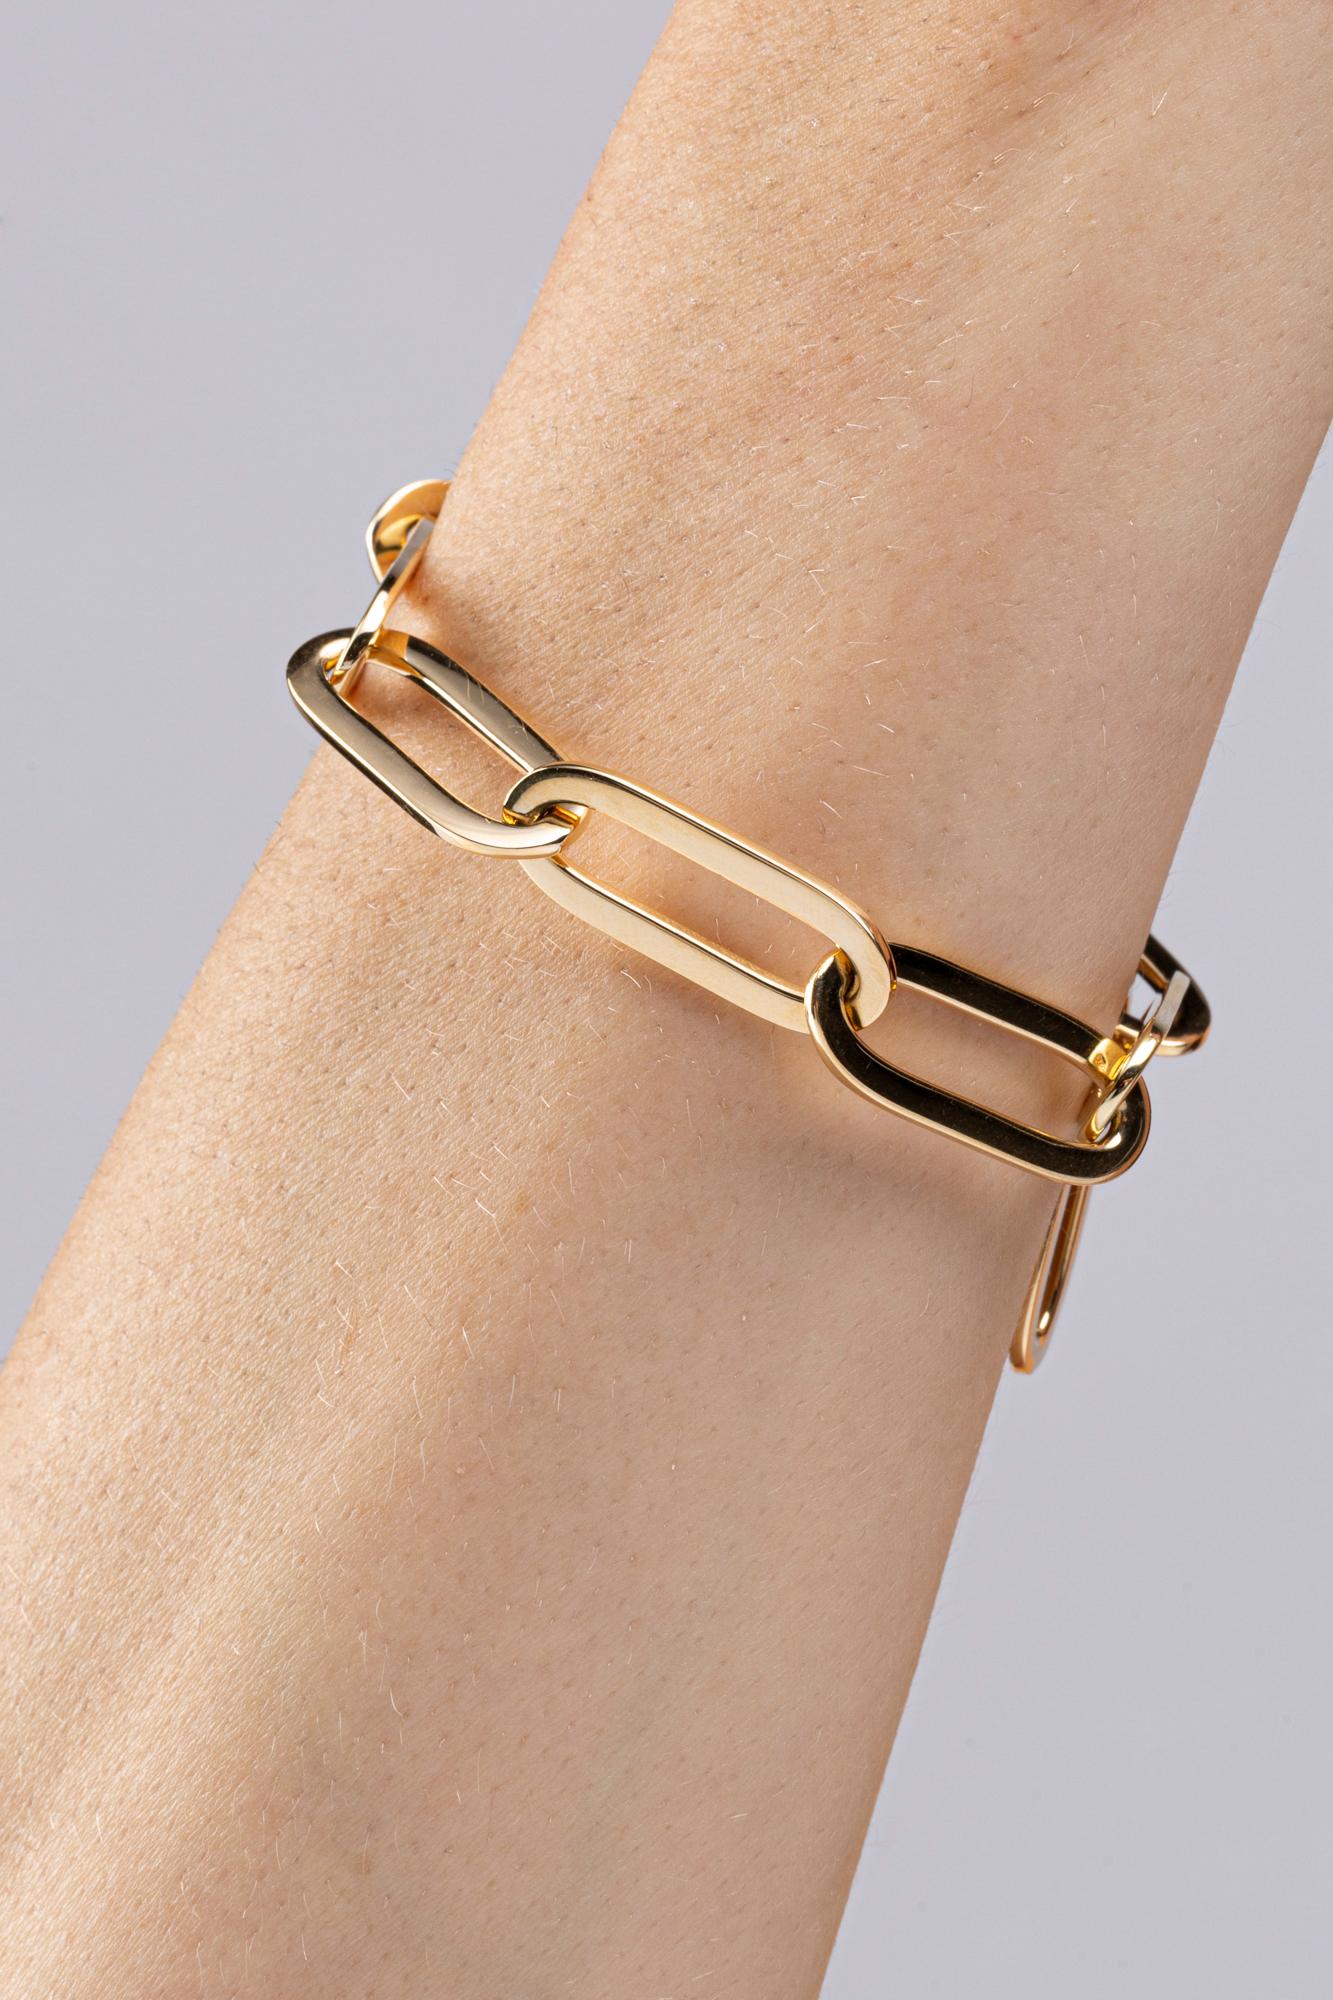 Alex Jona design collection, hand crafted in Italy, 18 karat yellow gold 8.46 in. long chain bracelet.

Alex Jona jewels stand out, not only for their special design and for the excellent quality of the gemstones, but also for the careful attention